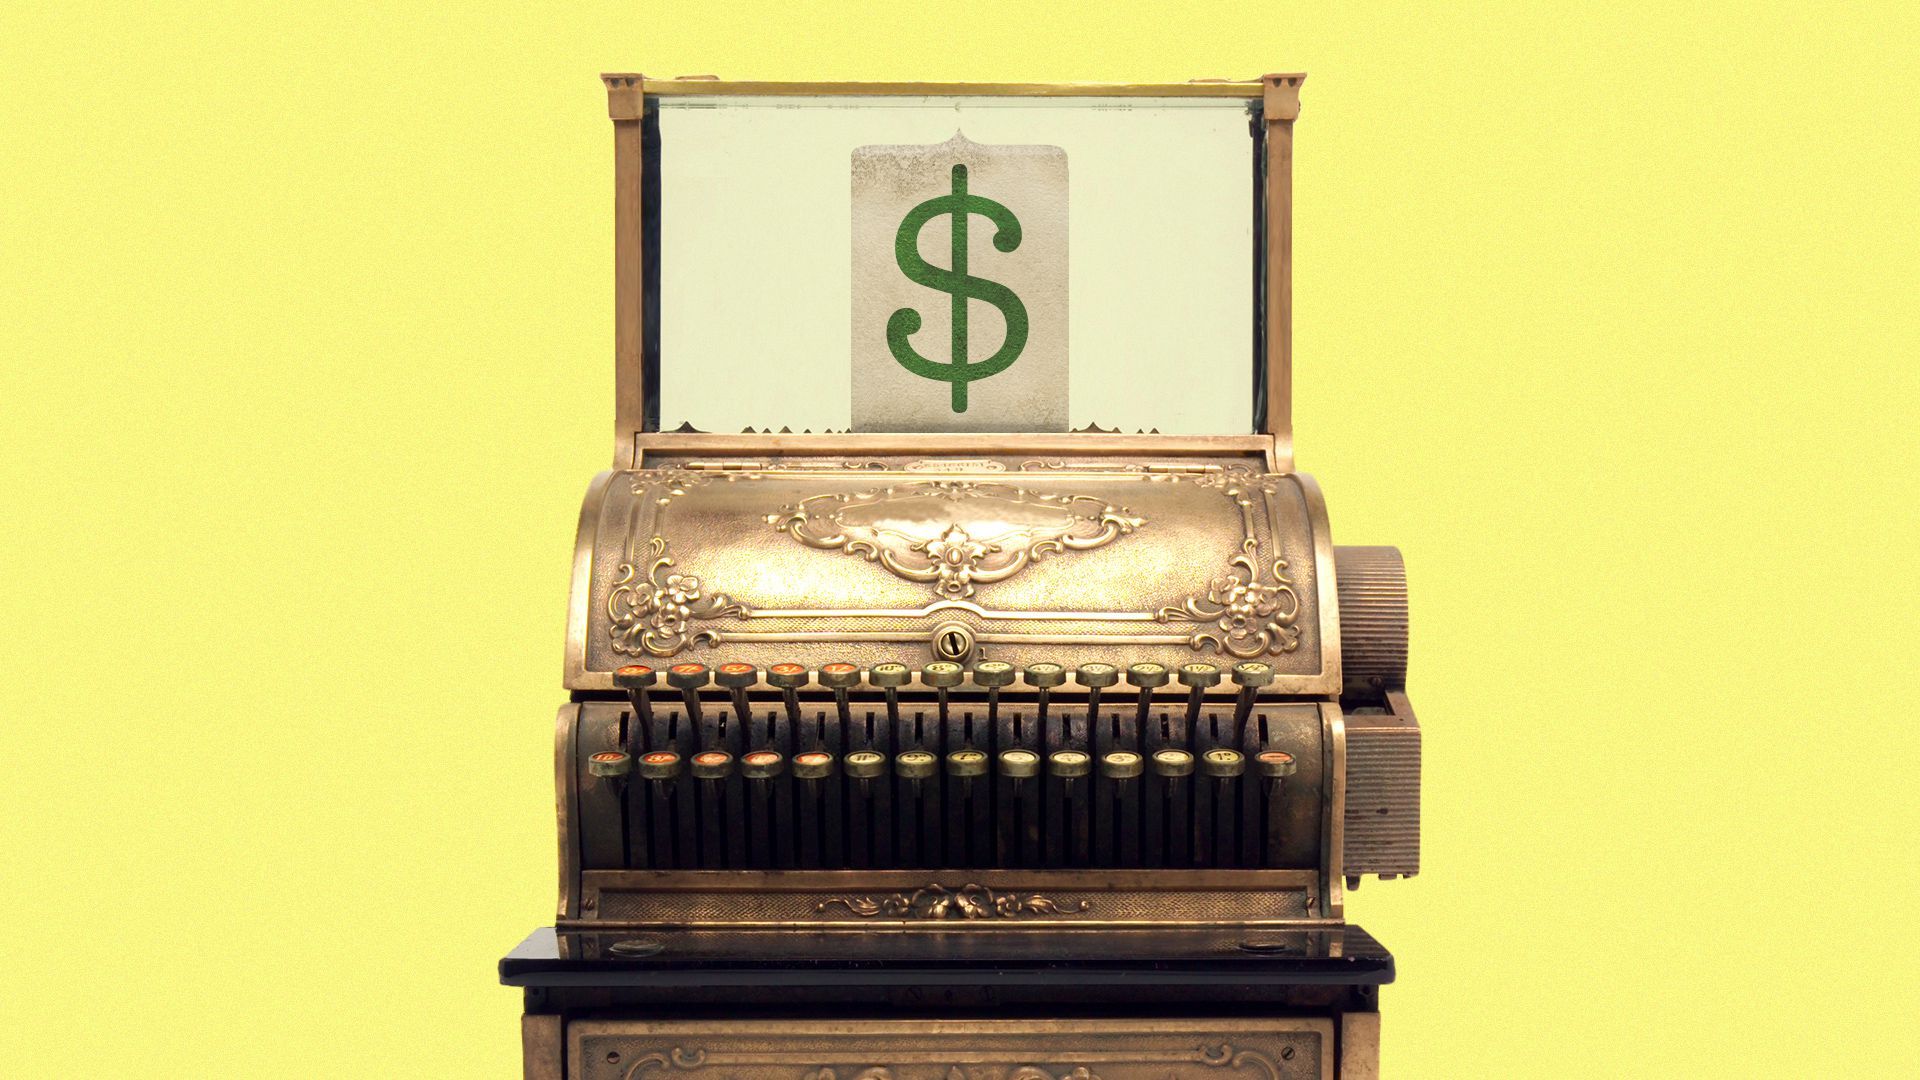 Illustration of a vintage cash register with an extra large display showing a dollar sign.